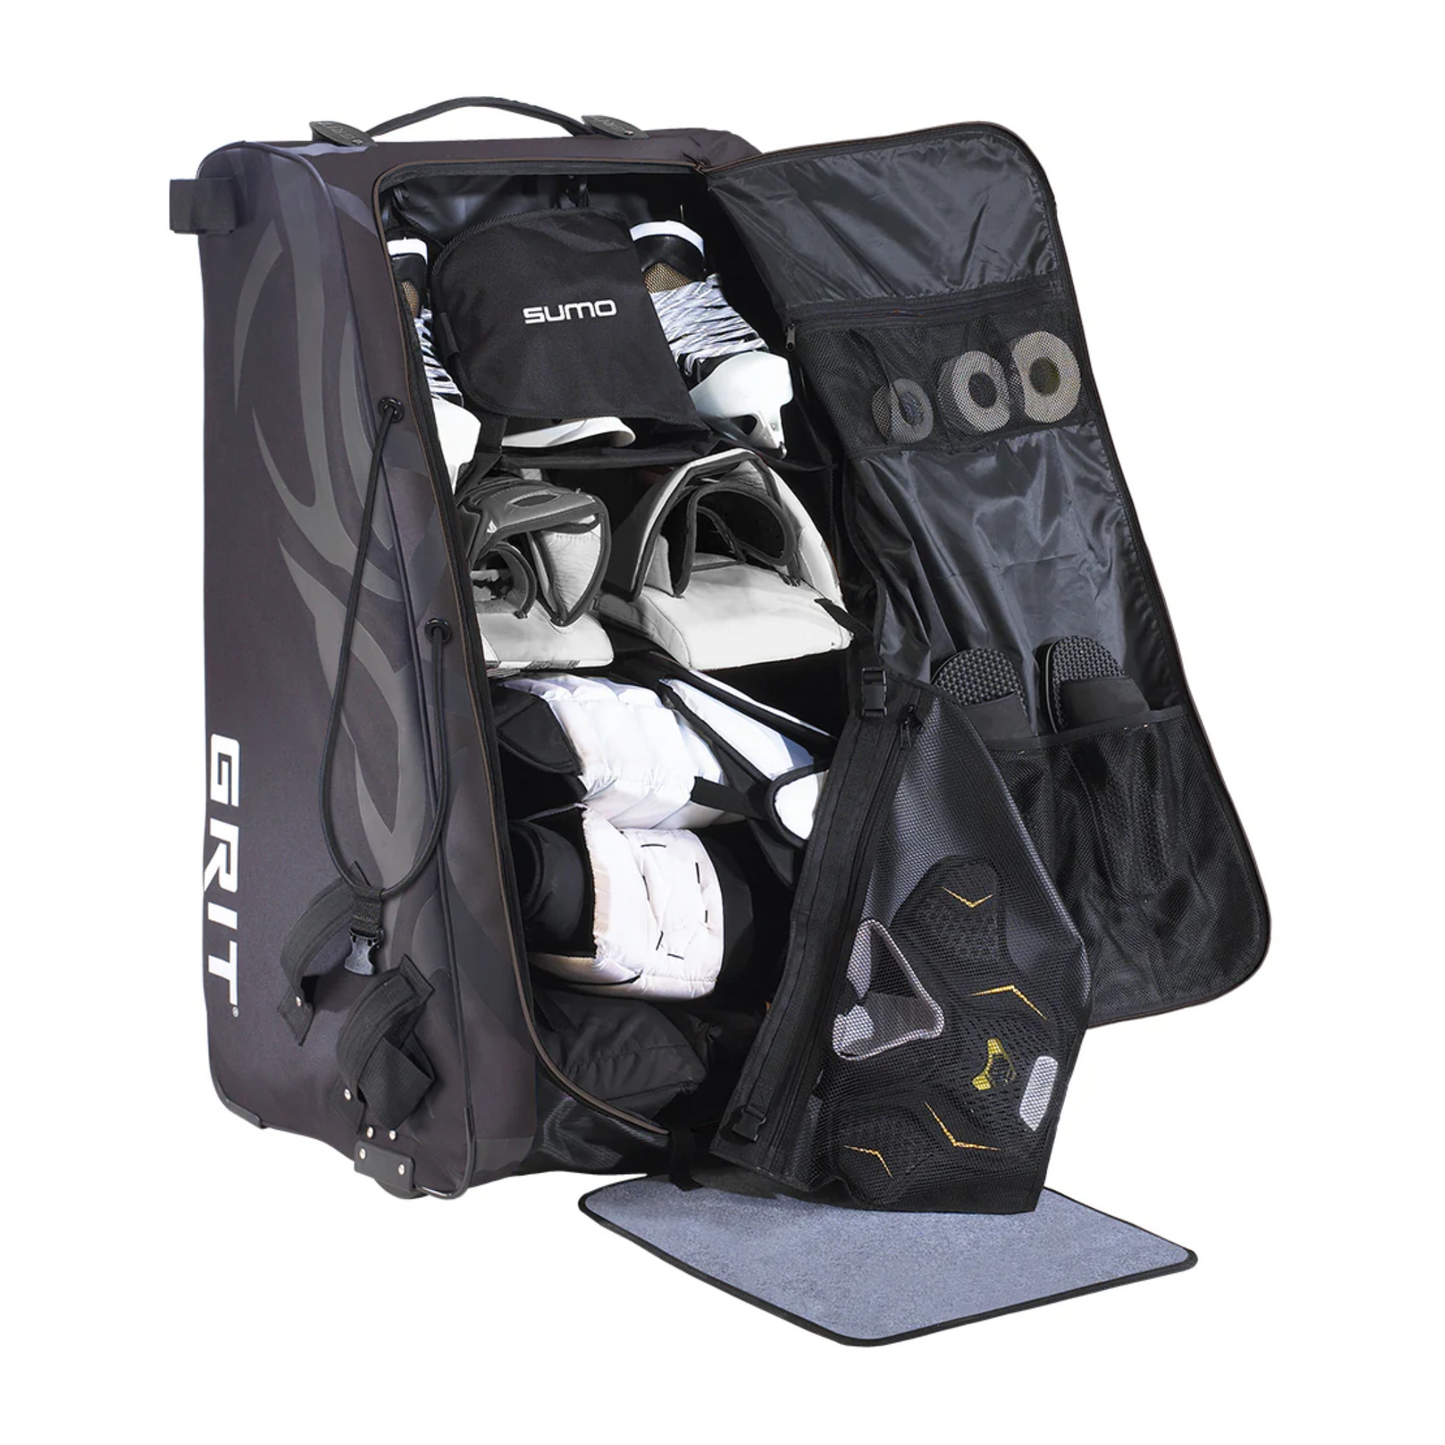 A photo of the GRIT GT4 Sumo Tower Goalie Hockey Bag 40" in colour black angled front view open bag fully loaded.